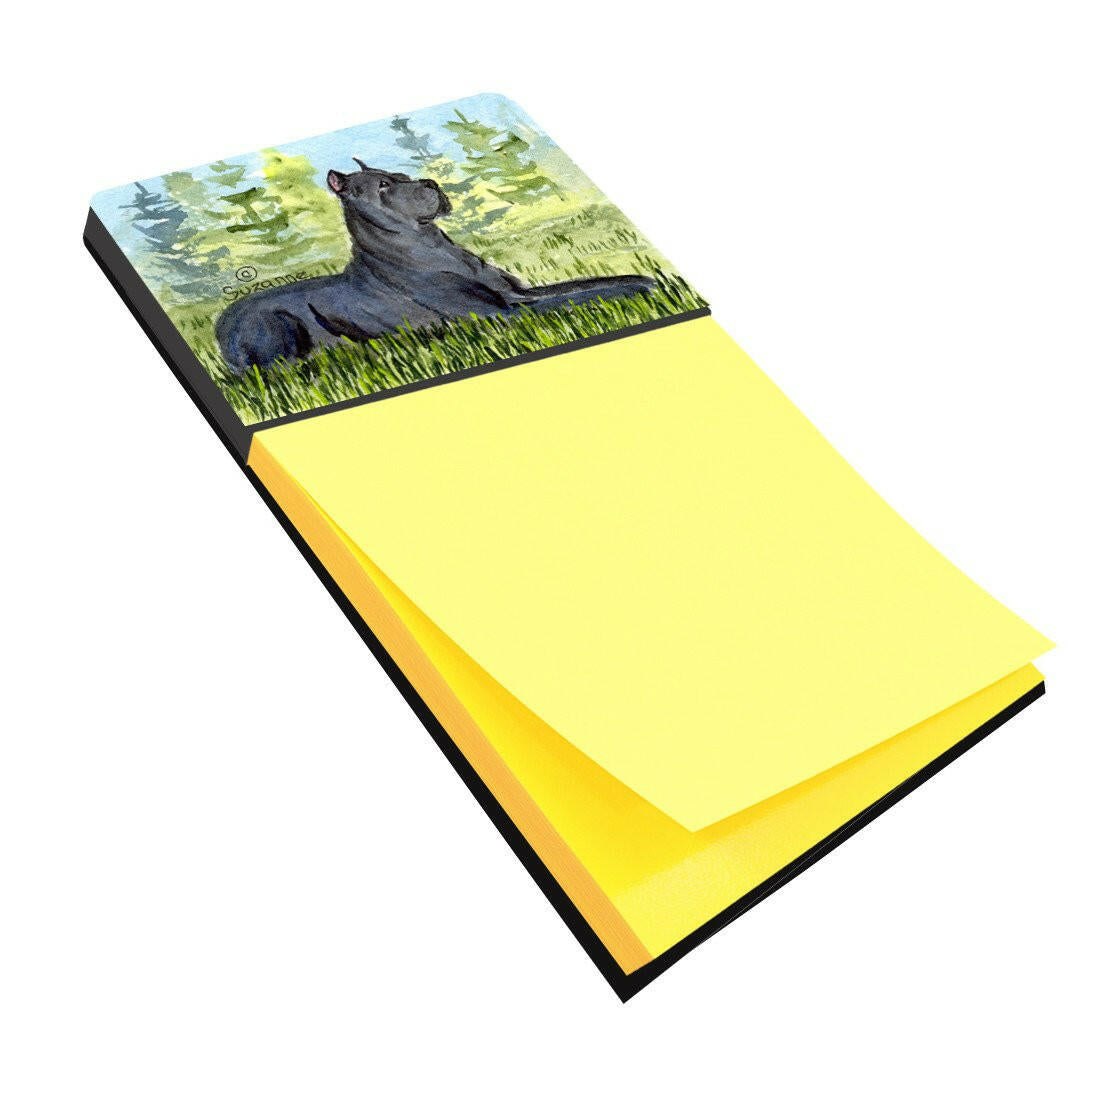 Cane Corso Refiillable Sticky Note Holder or Postit Note Dispenser SS8682SN by Caroline's Treasures